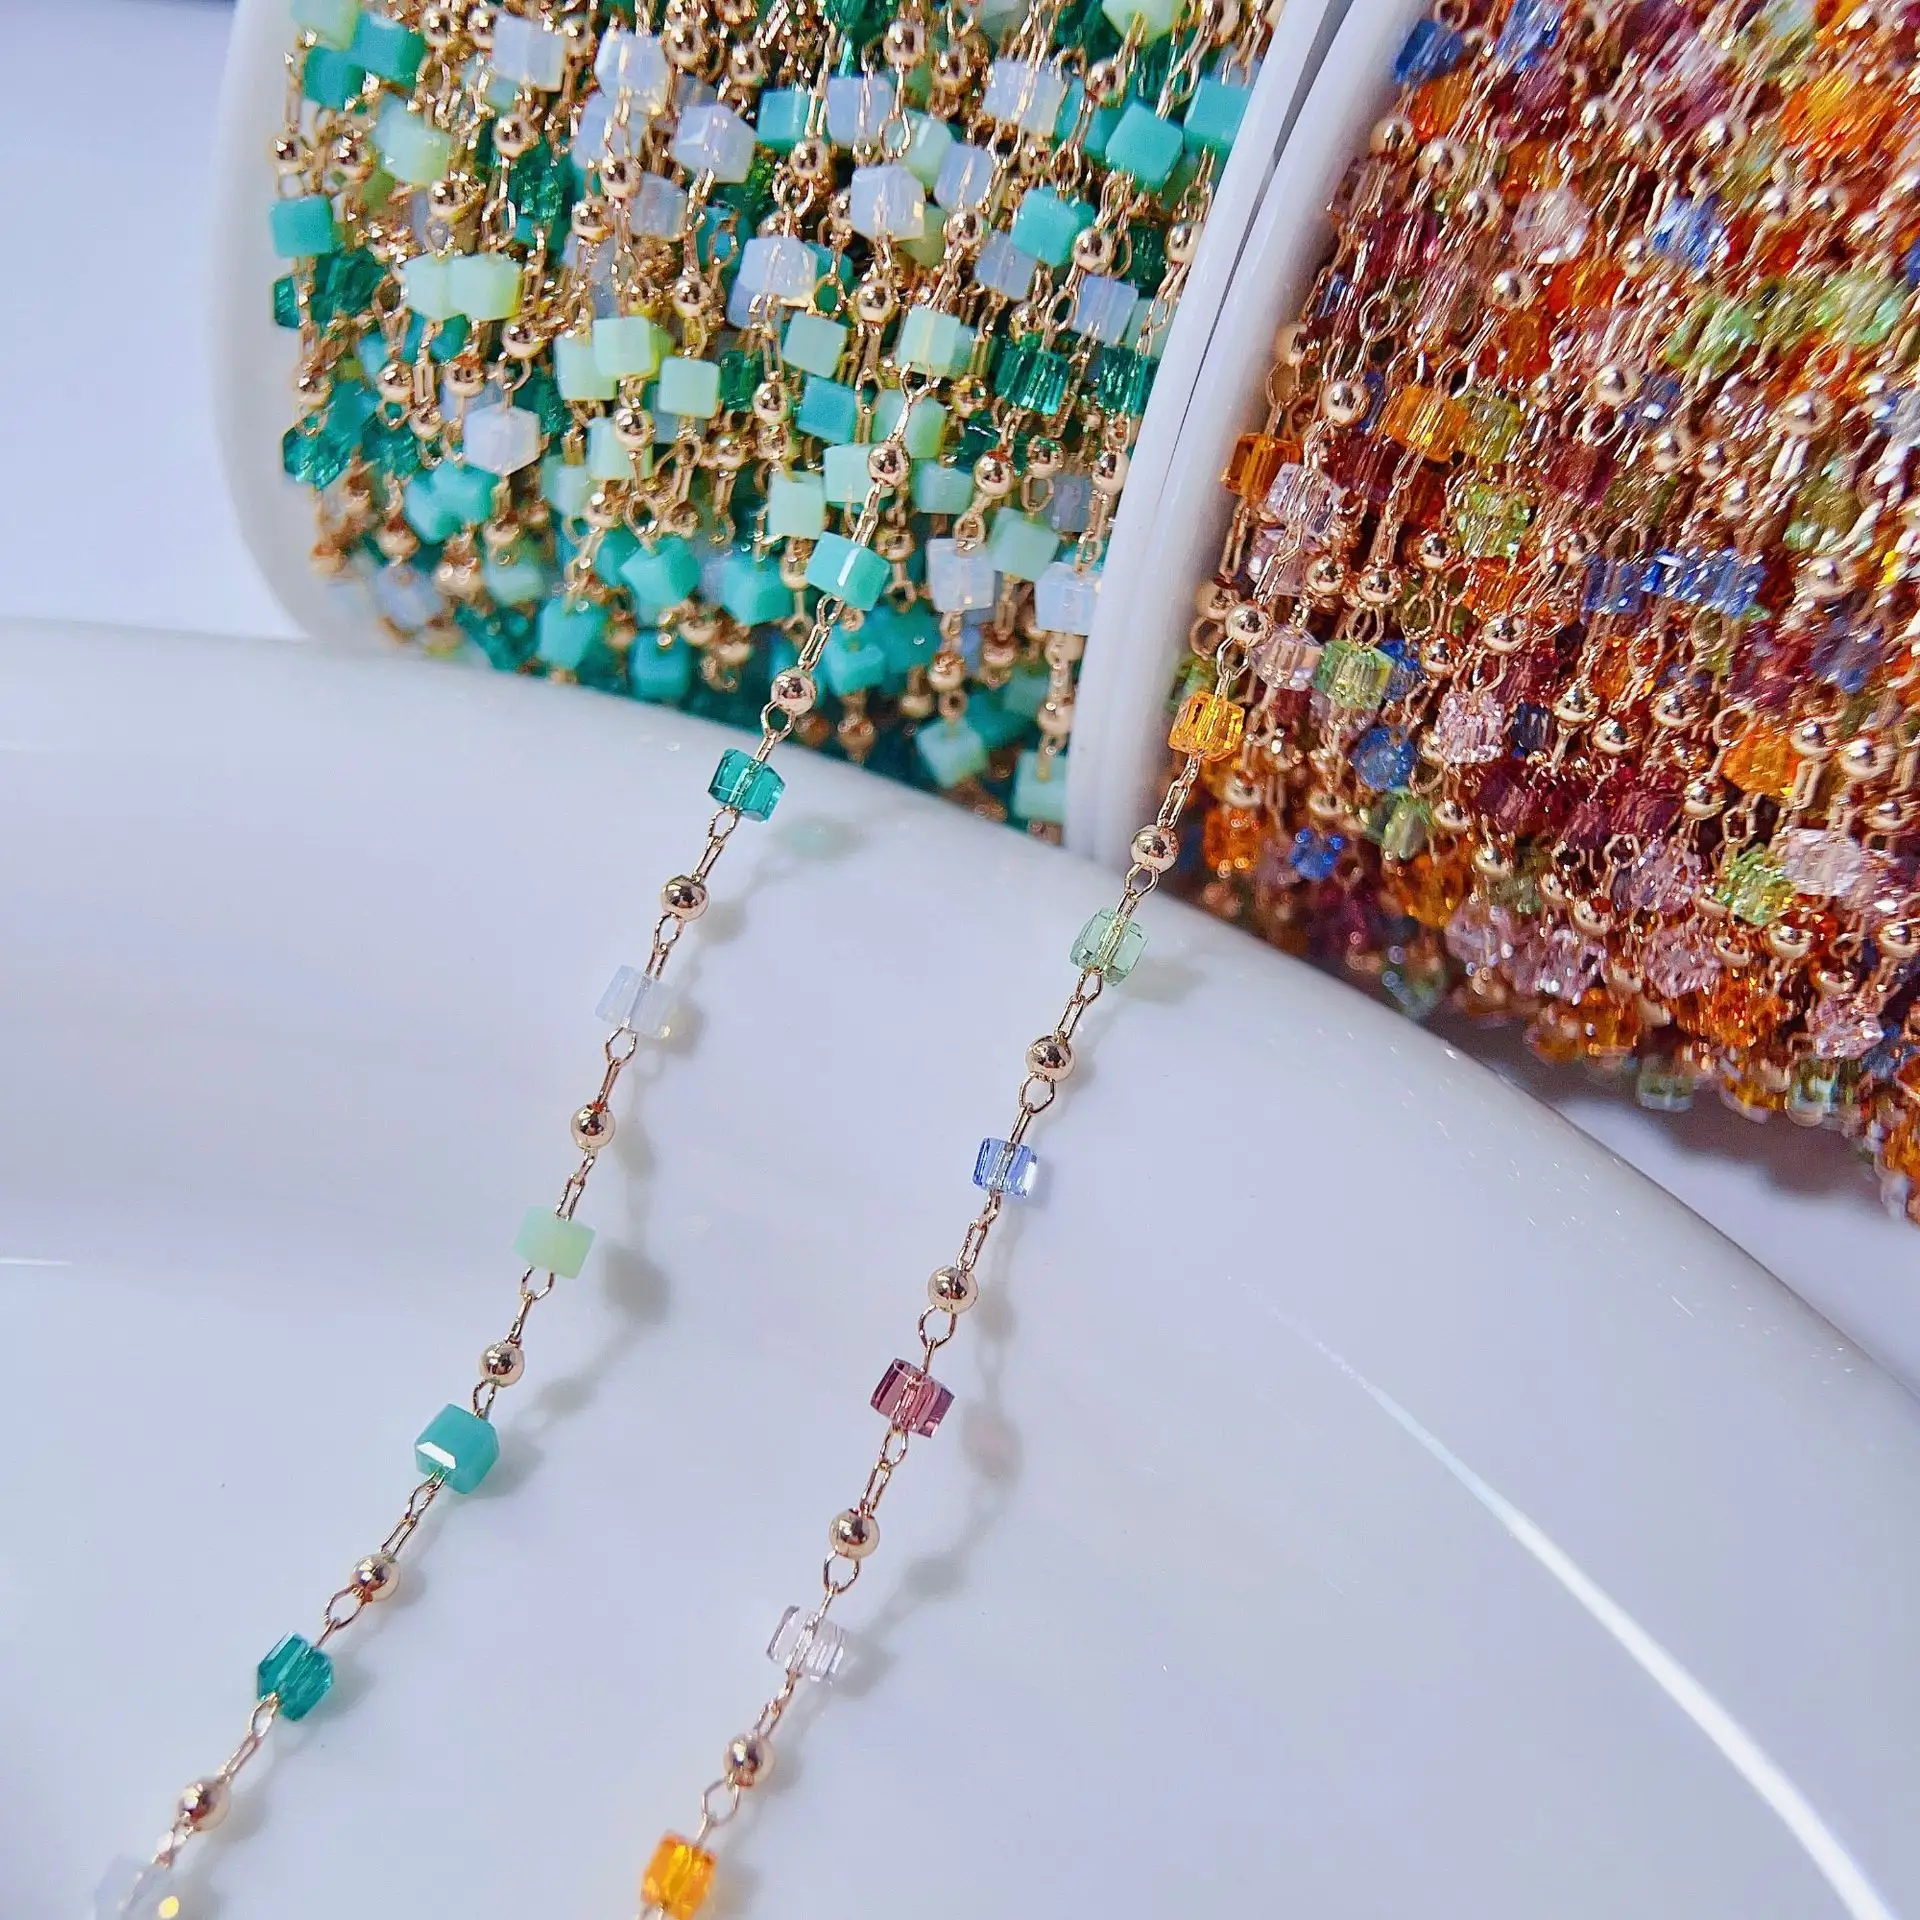 Hobbyworker 20m/roll Handmade Copper Mixed Color Crystal Beads Chains For Diy Necklace Earrings Waist Chain Making C0469